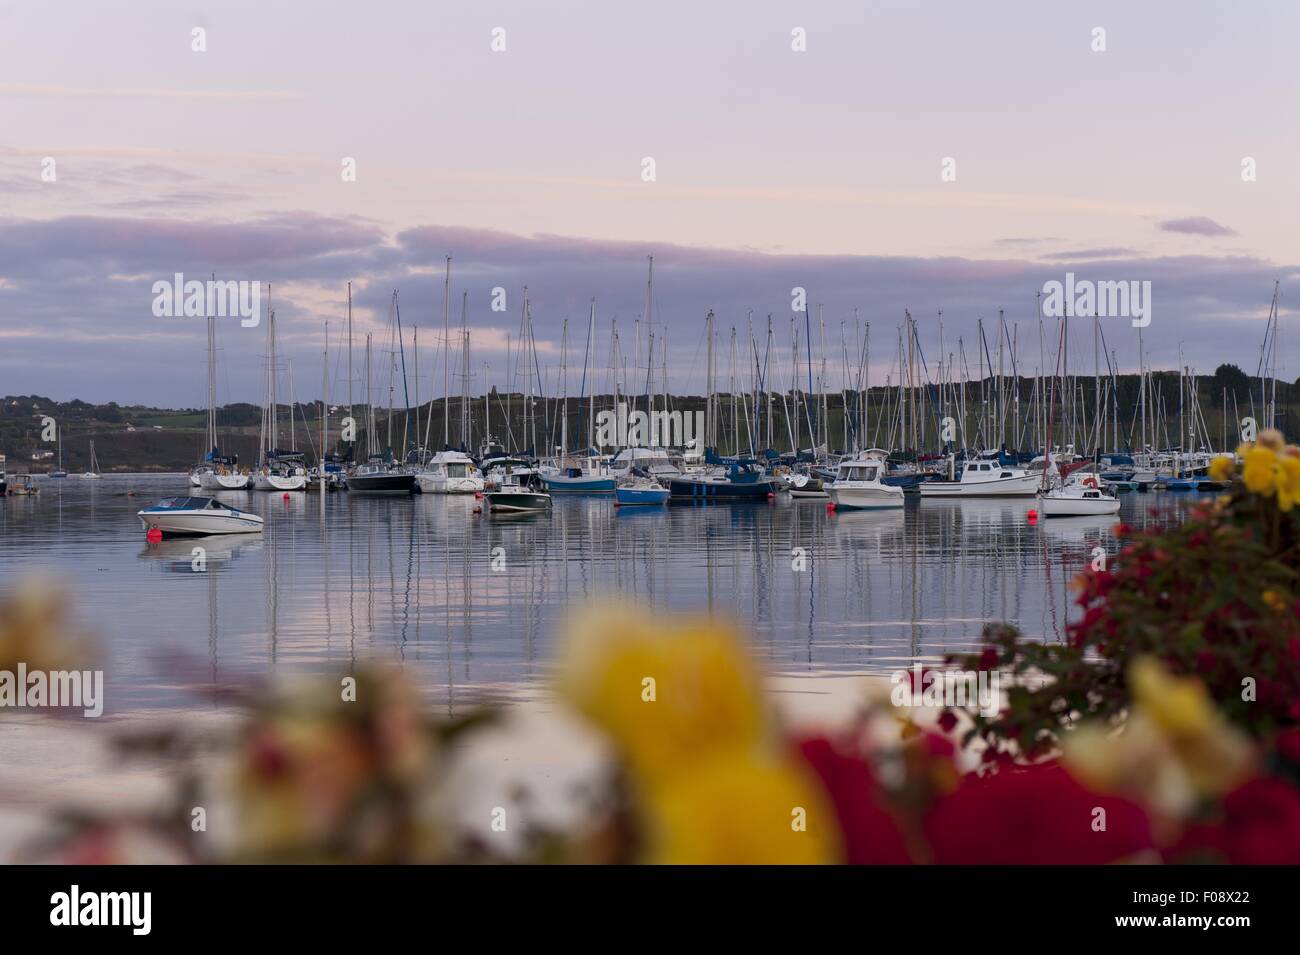 View of sailboats moored at Kinsale harbour at sunset, Ireland, UK Stock Photo